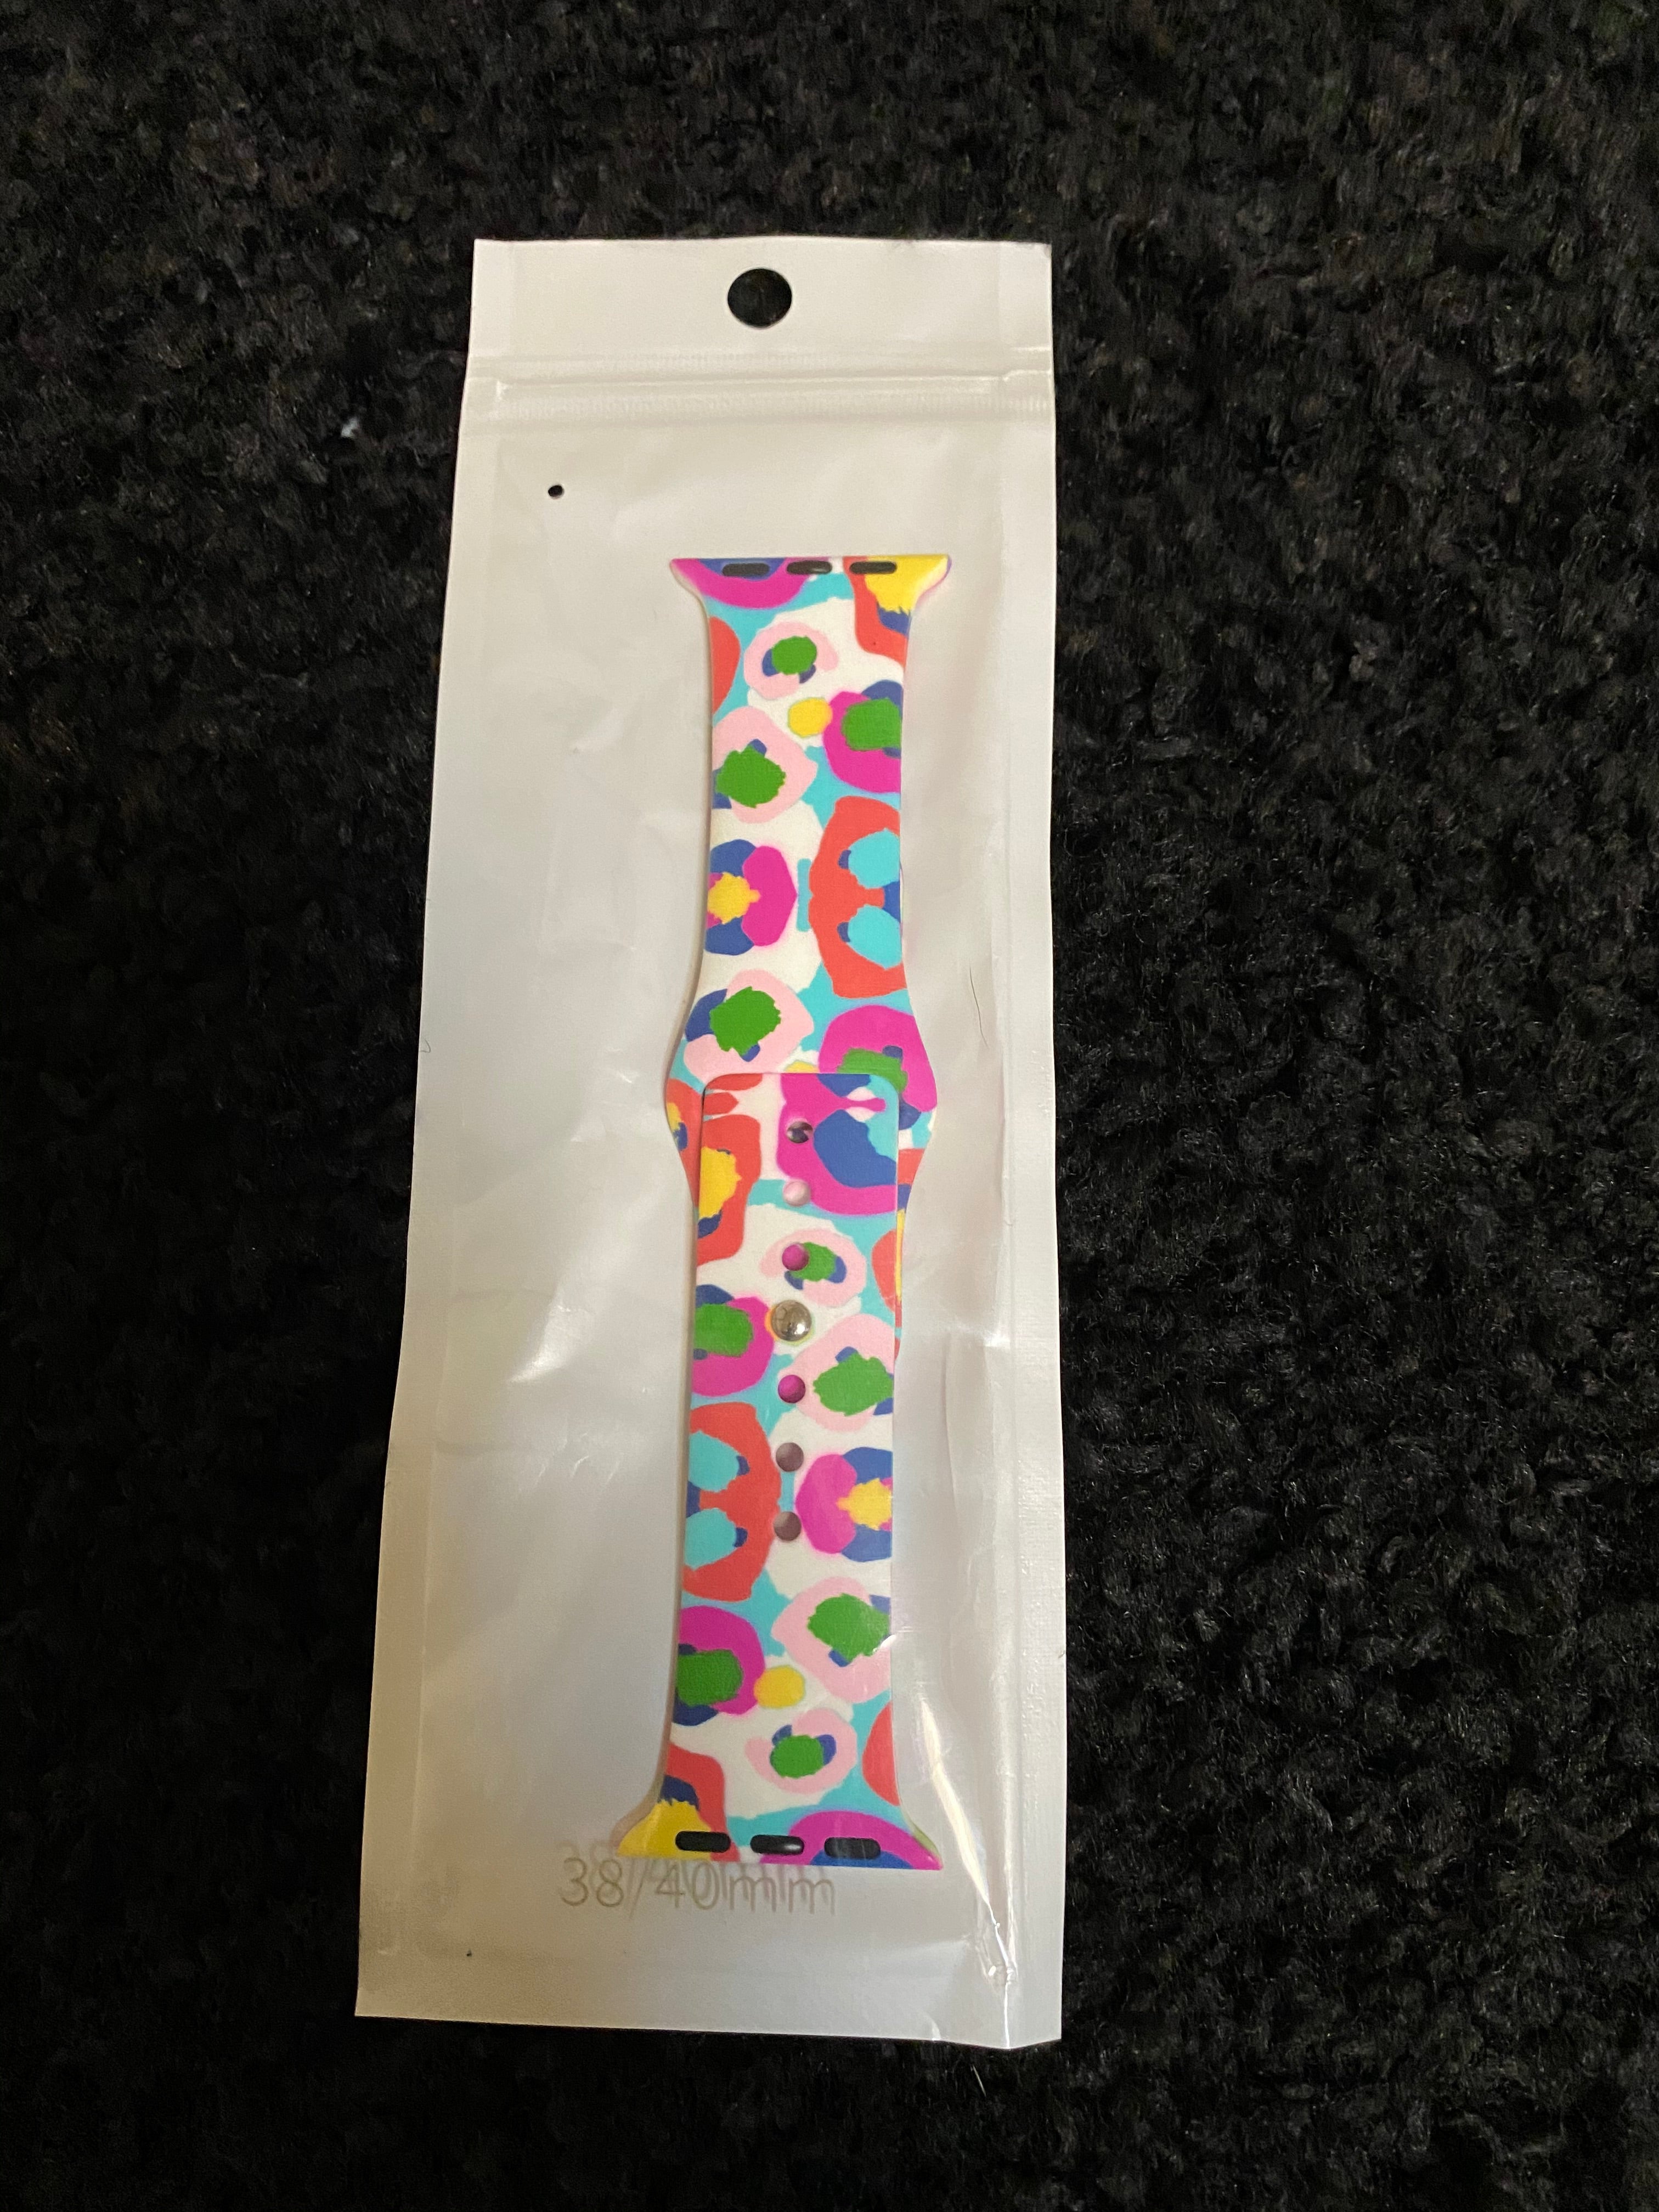 Patterned Apple Watch Bands (38/40mm)